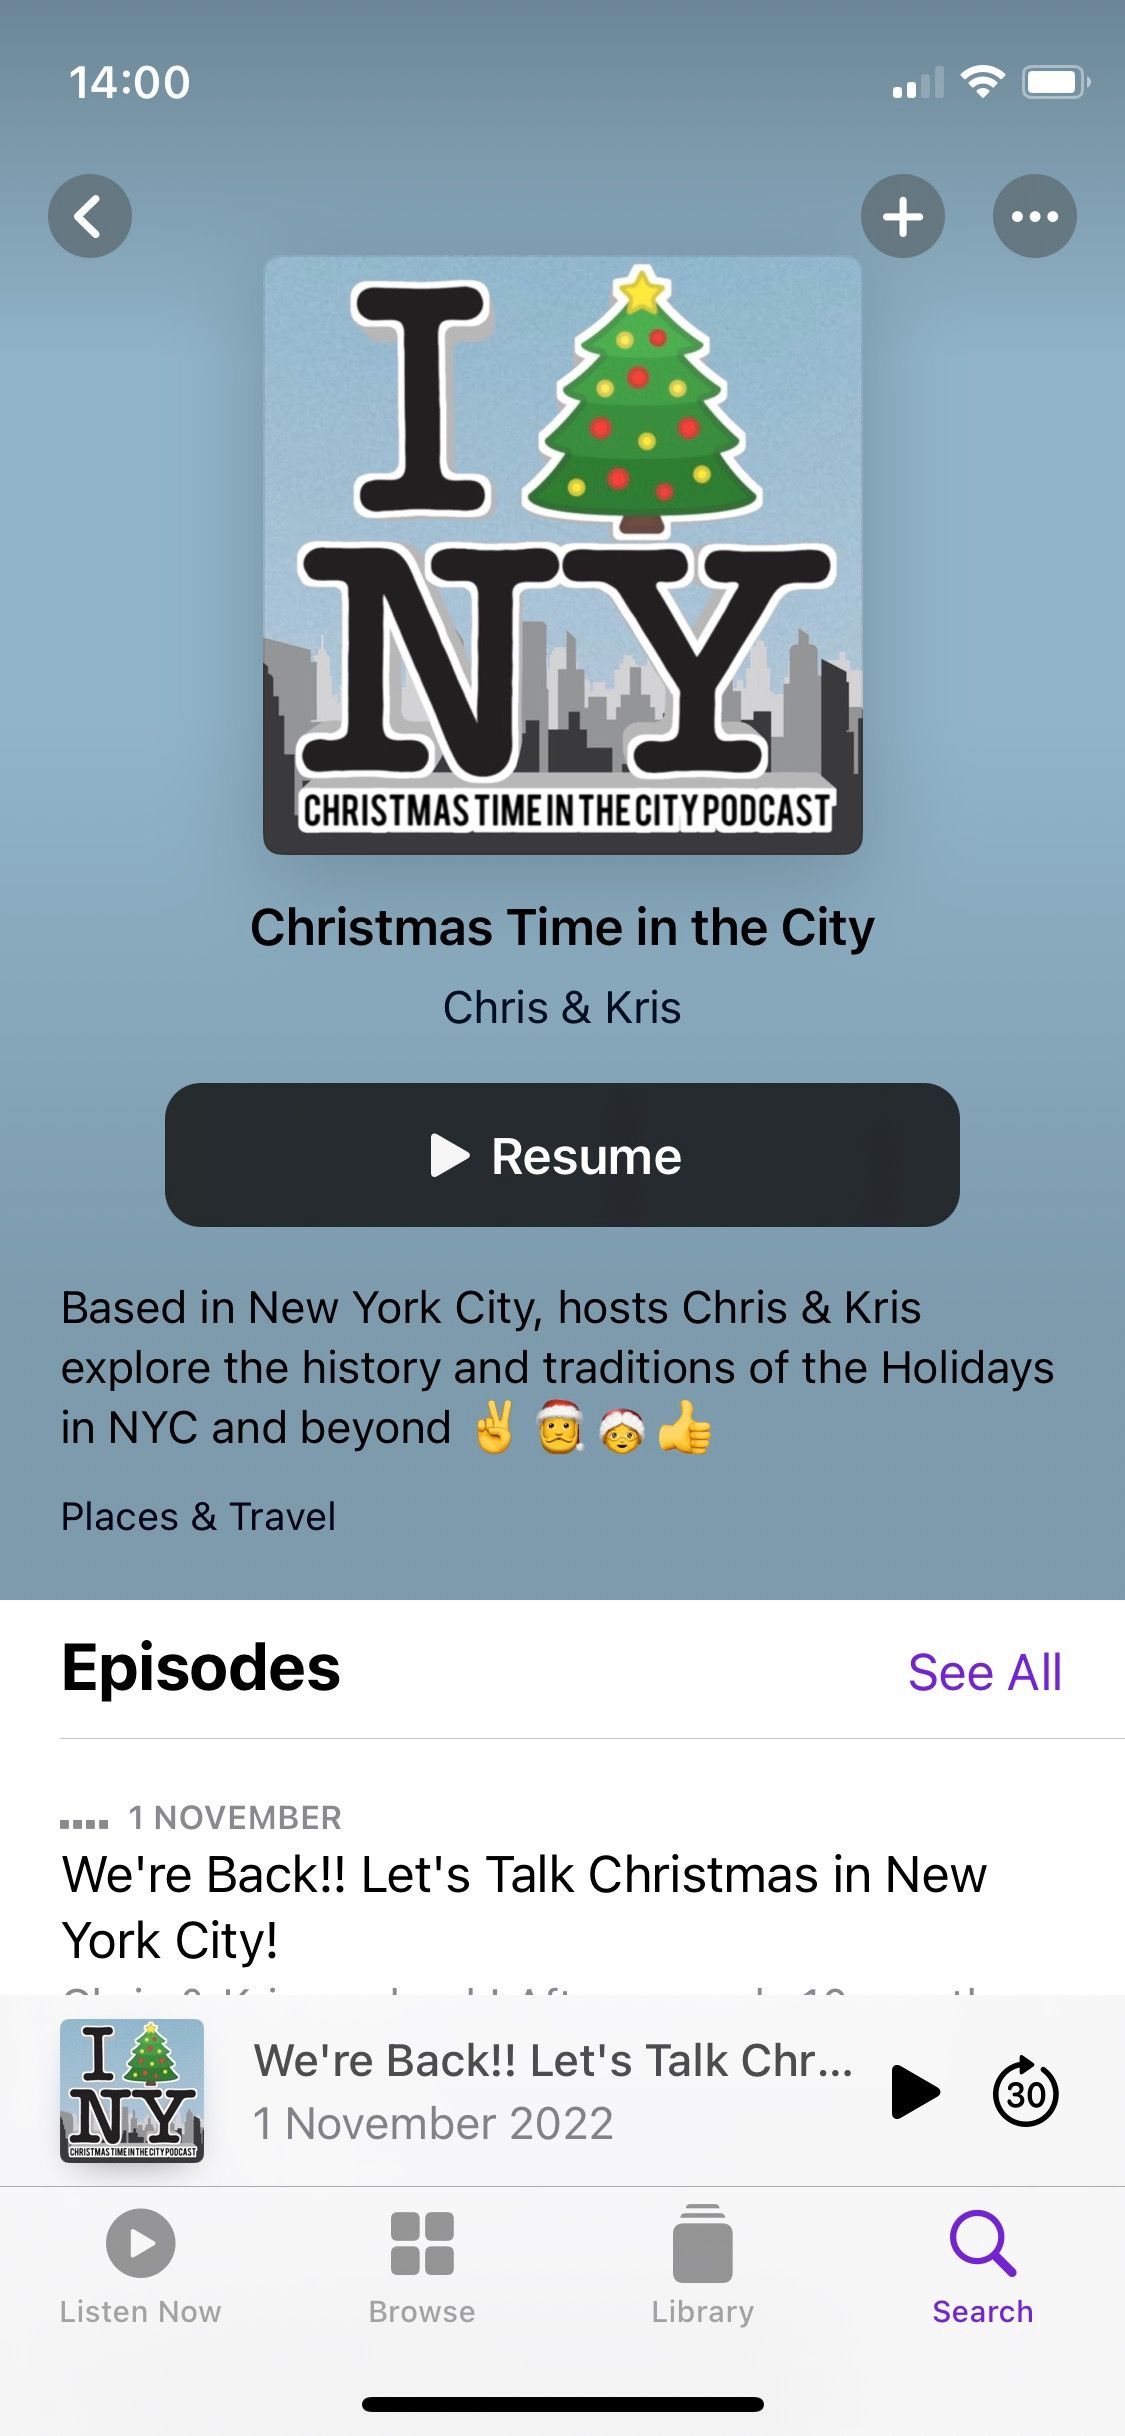 Screenshot of the home page of the Christmas Time in the City podcast